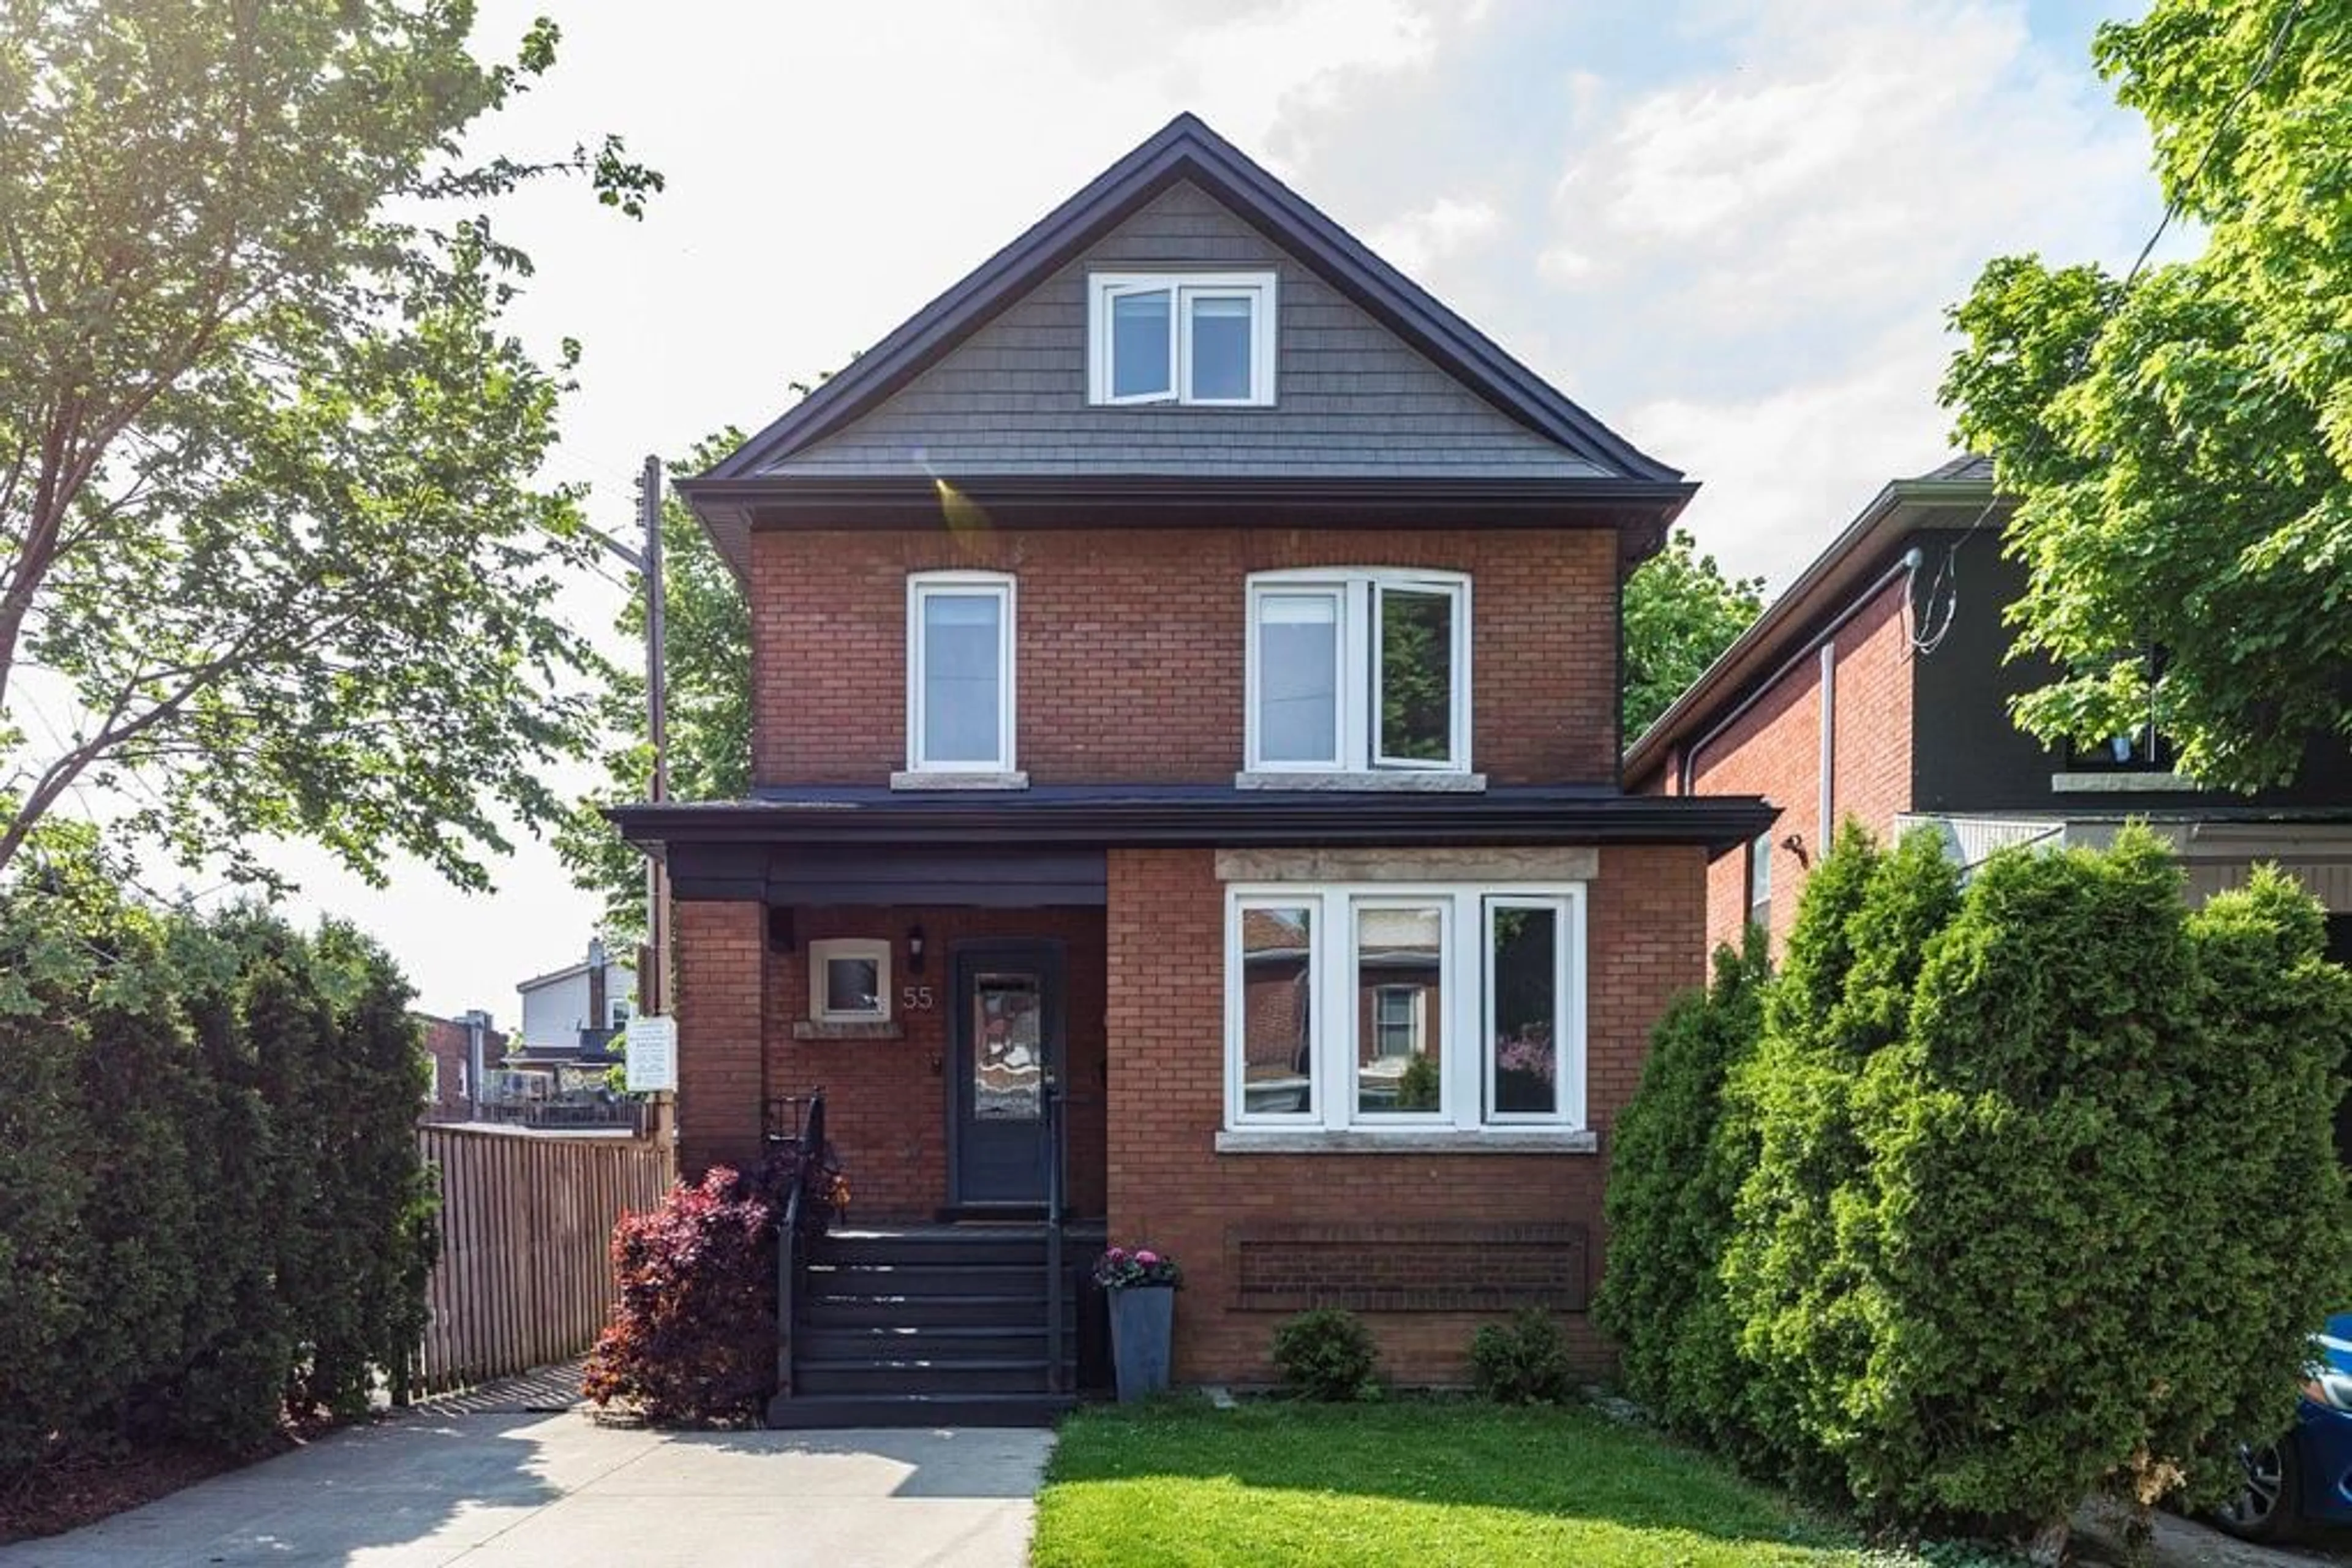 Home with brick exterior material for 55 BALMORAL Ave, Hamilton Ontario L8L 7R5